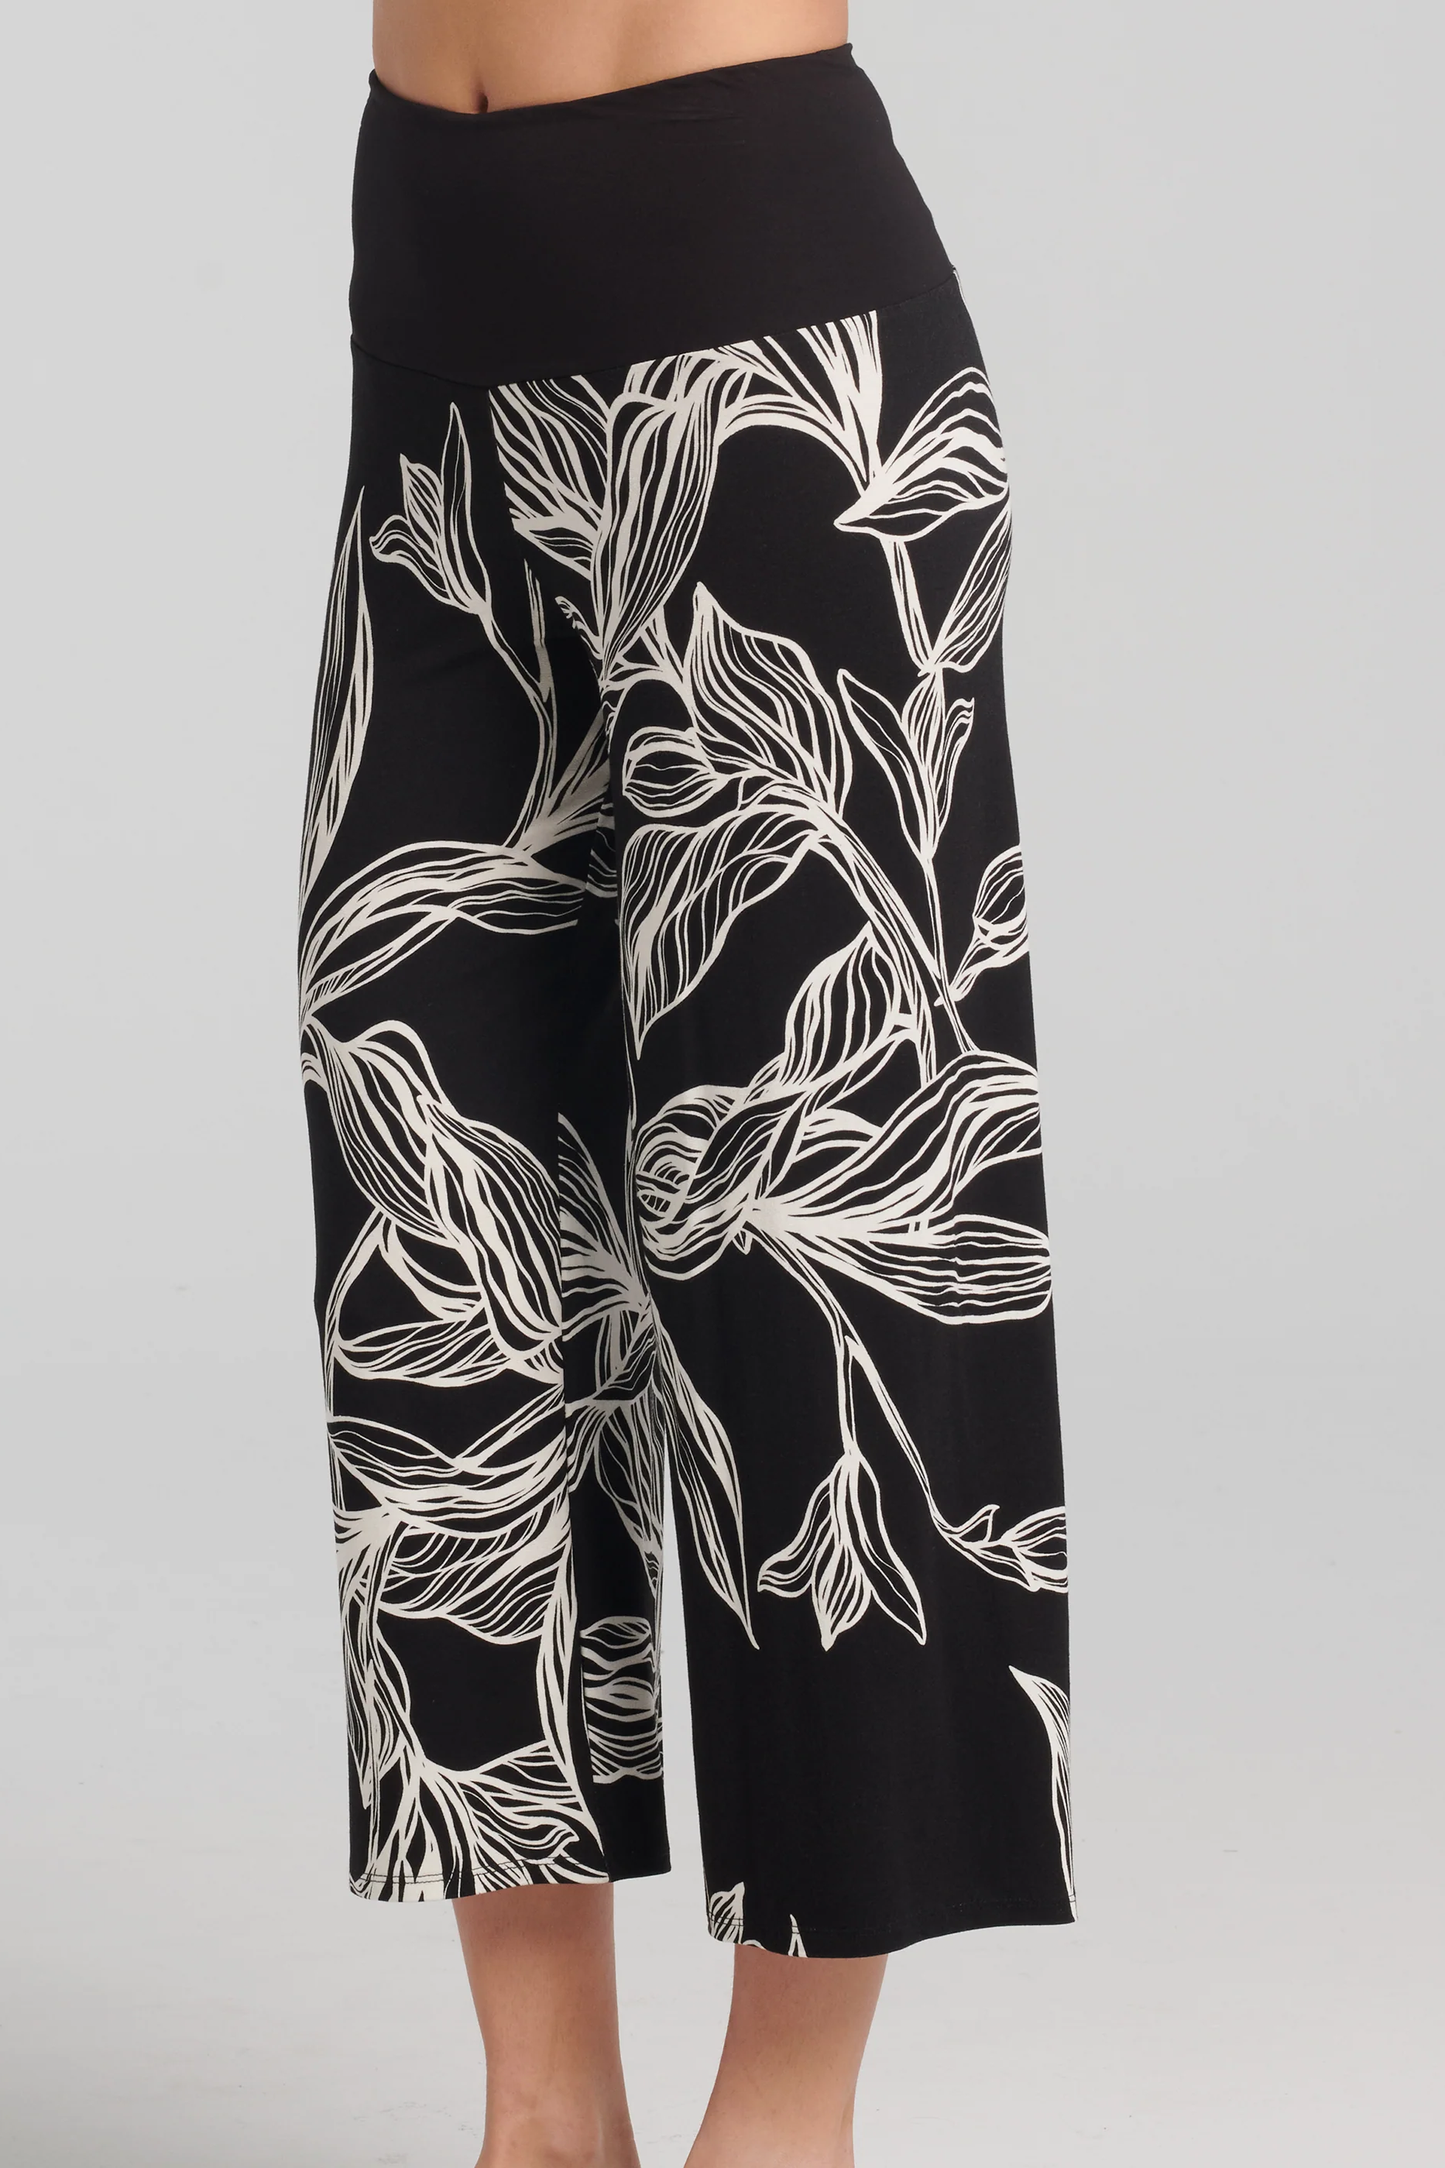 Thora Pants by Kollontai, Black and white leaf print, solid black pull-on waistband, wide legs, slightly cropped, sizes XS to XXL, made in Montreal